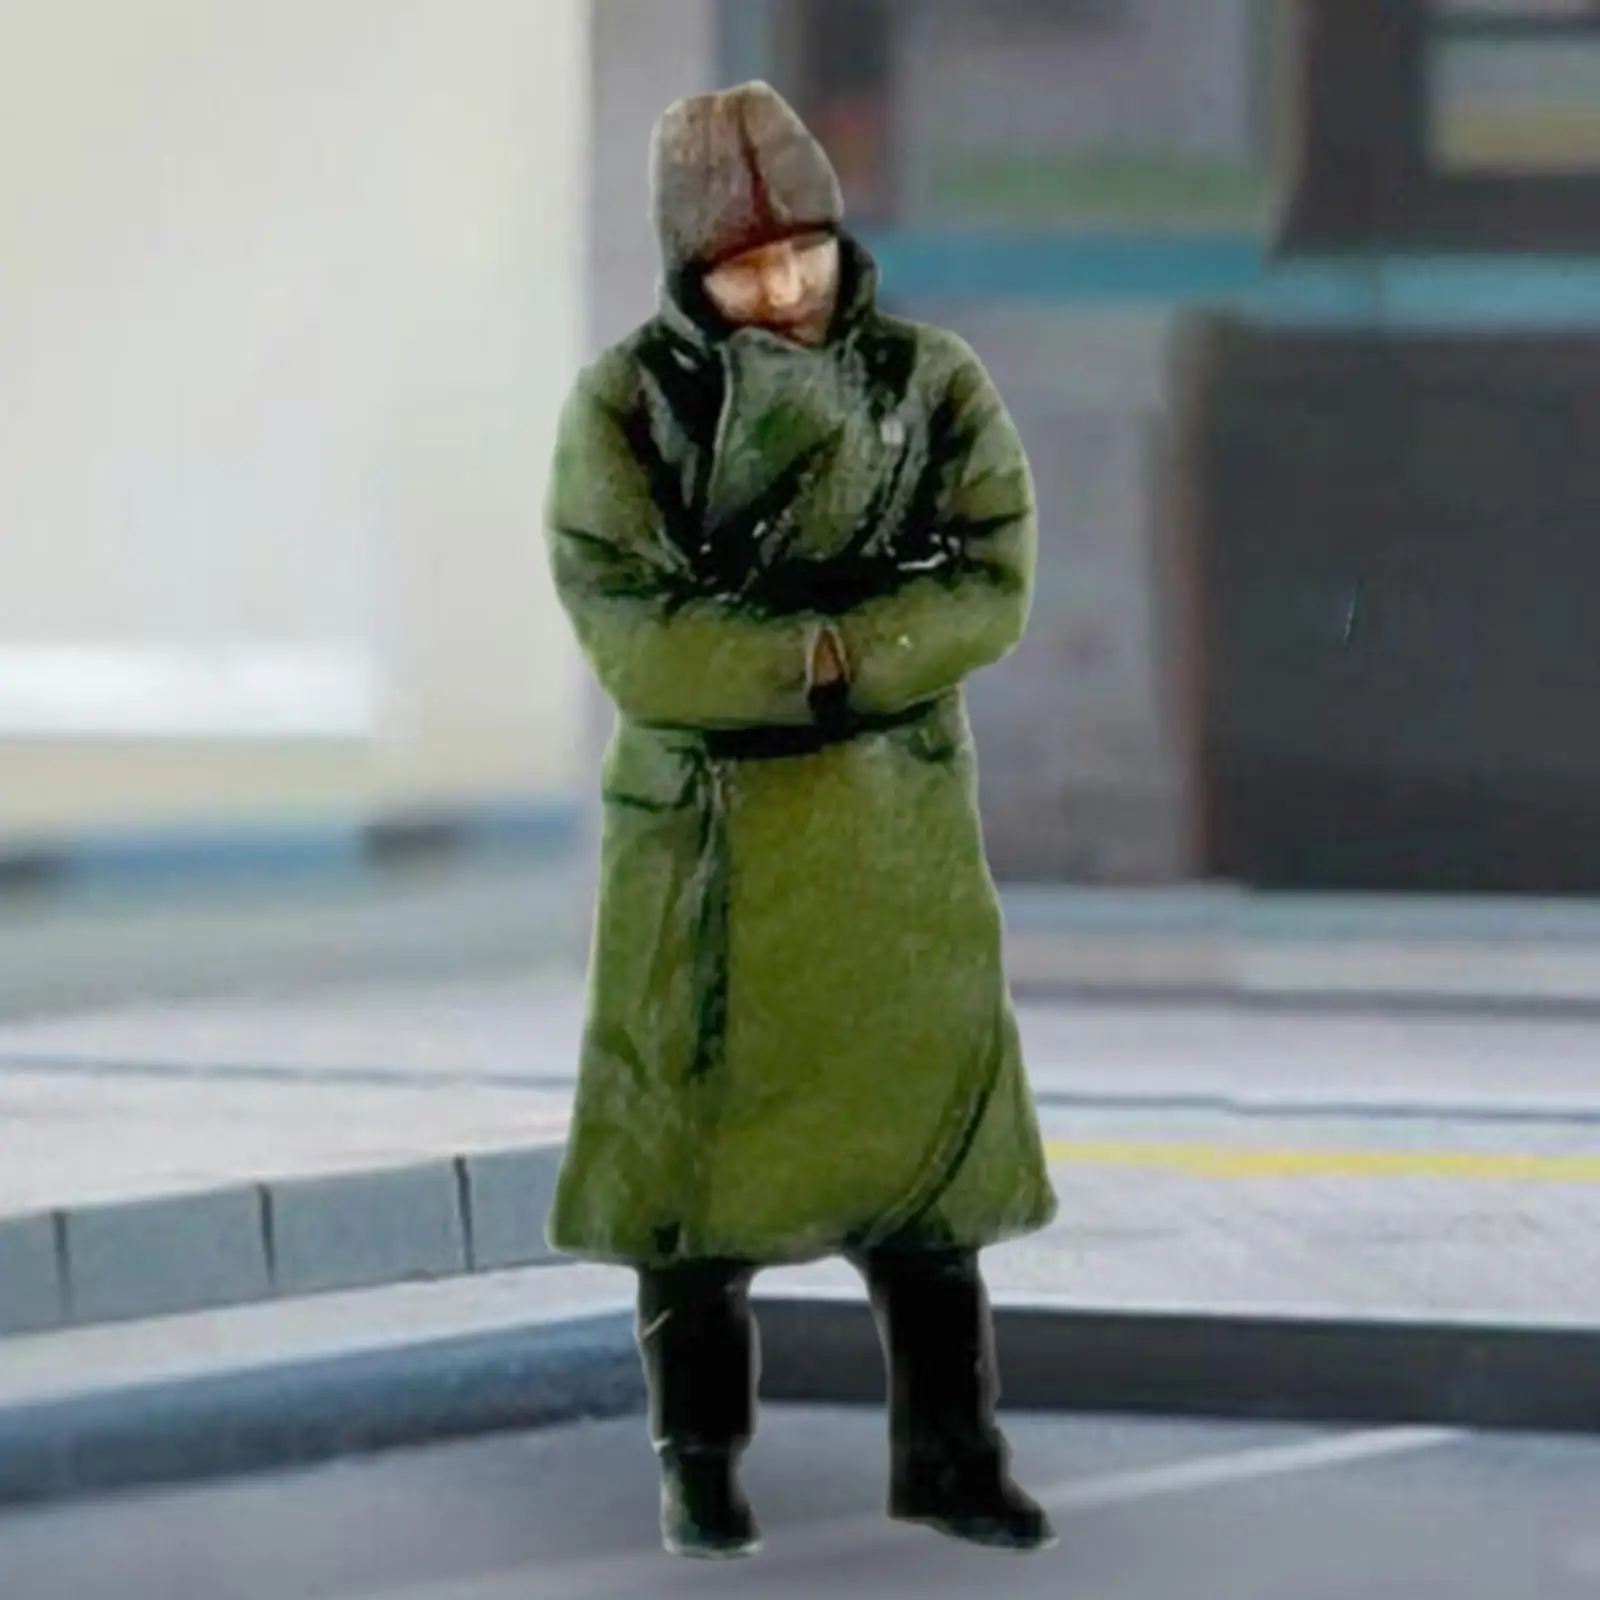 1/87 Resin Model Figure wearing Green Coat Sand Table Ornament Collection People Figurines for Miniature Scene Decor Accessories